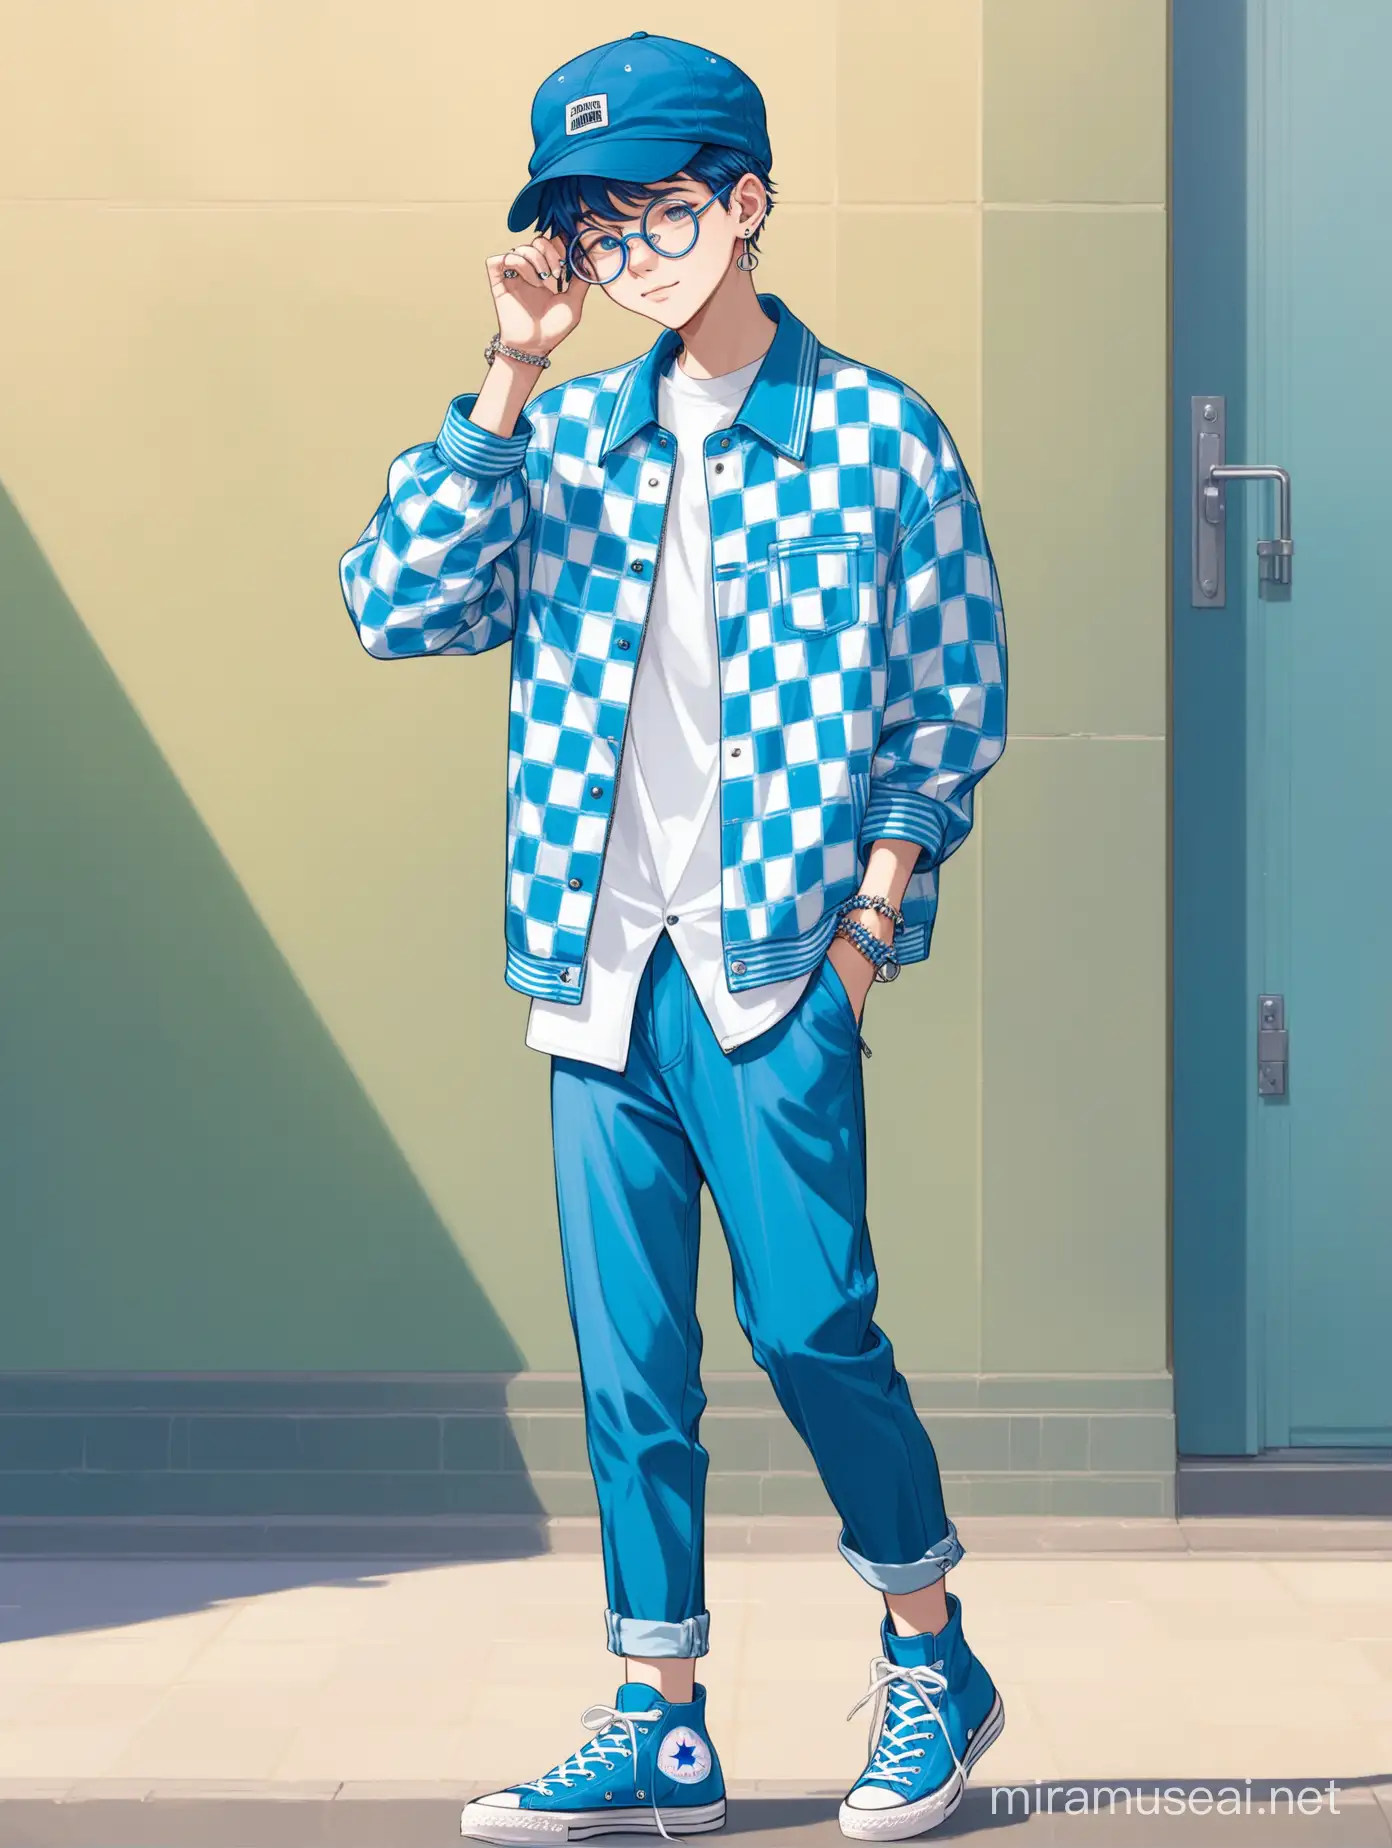 A teenager wearing a cap hat, a blue shirt with a white checkered jacket over it (casual), transparent round-rimmed glasses, blue high-top pants, blue Converse shoes, earrings in his ears and rings on his hands